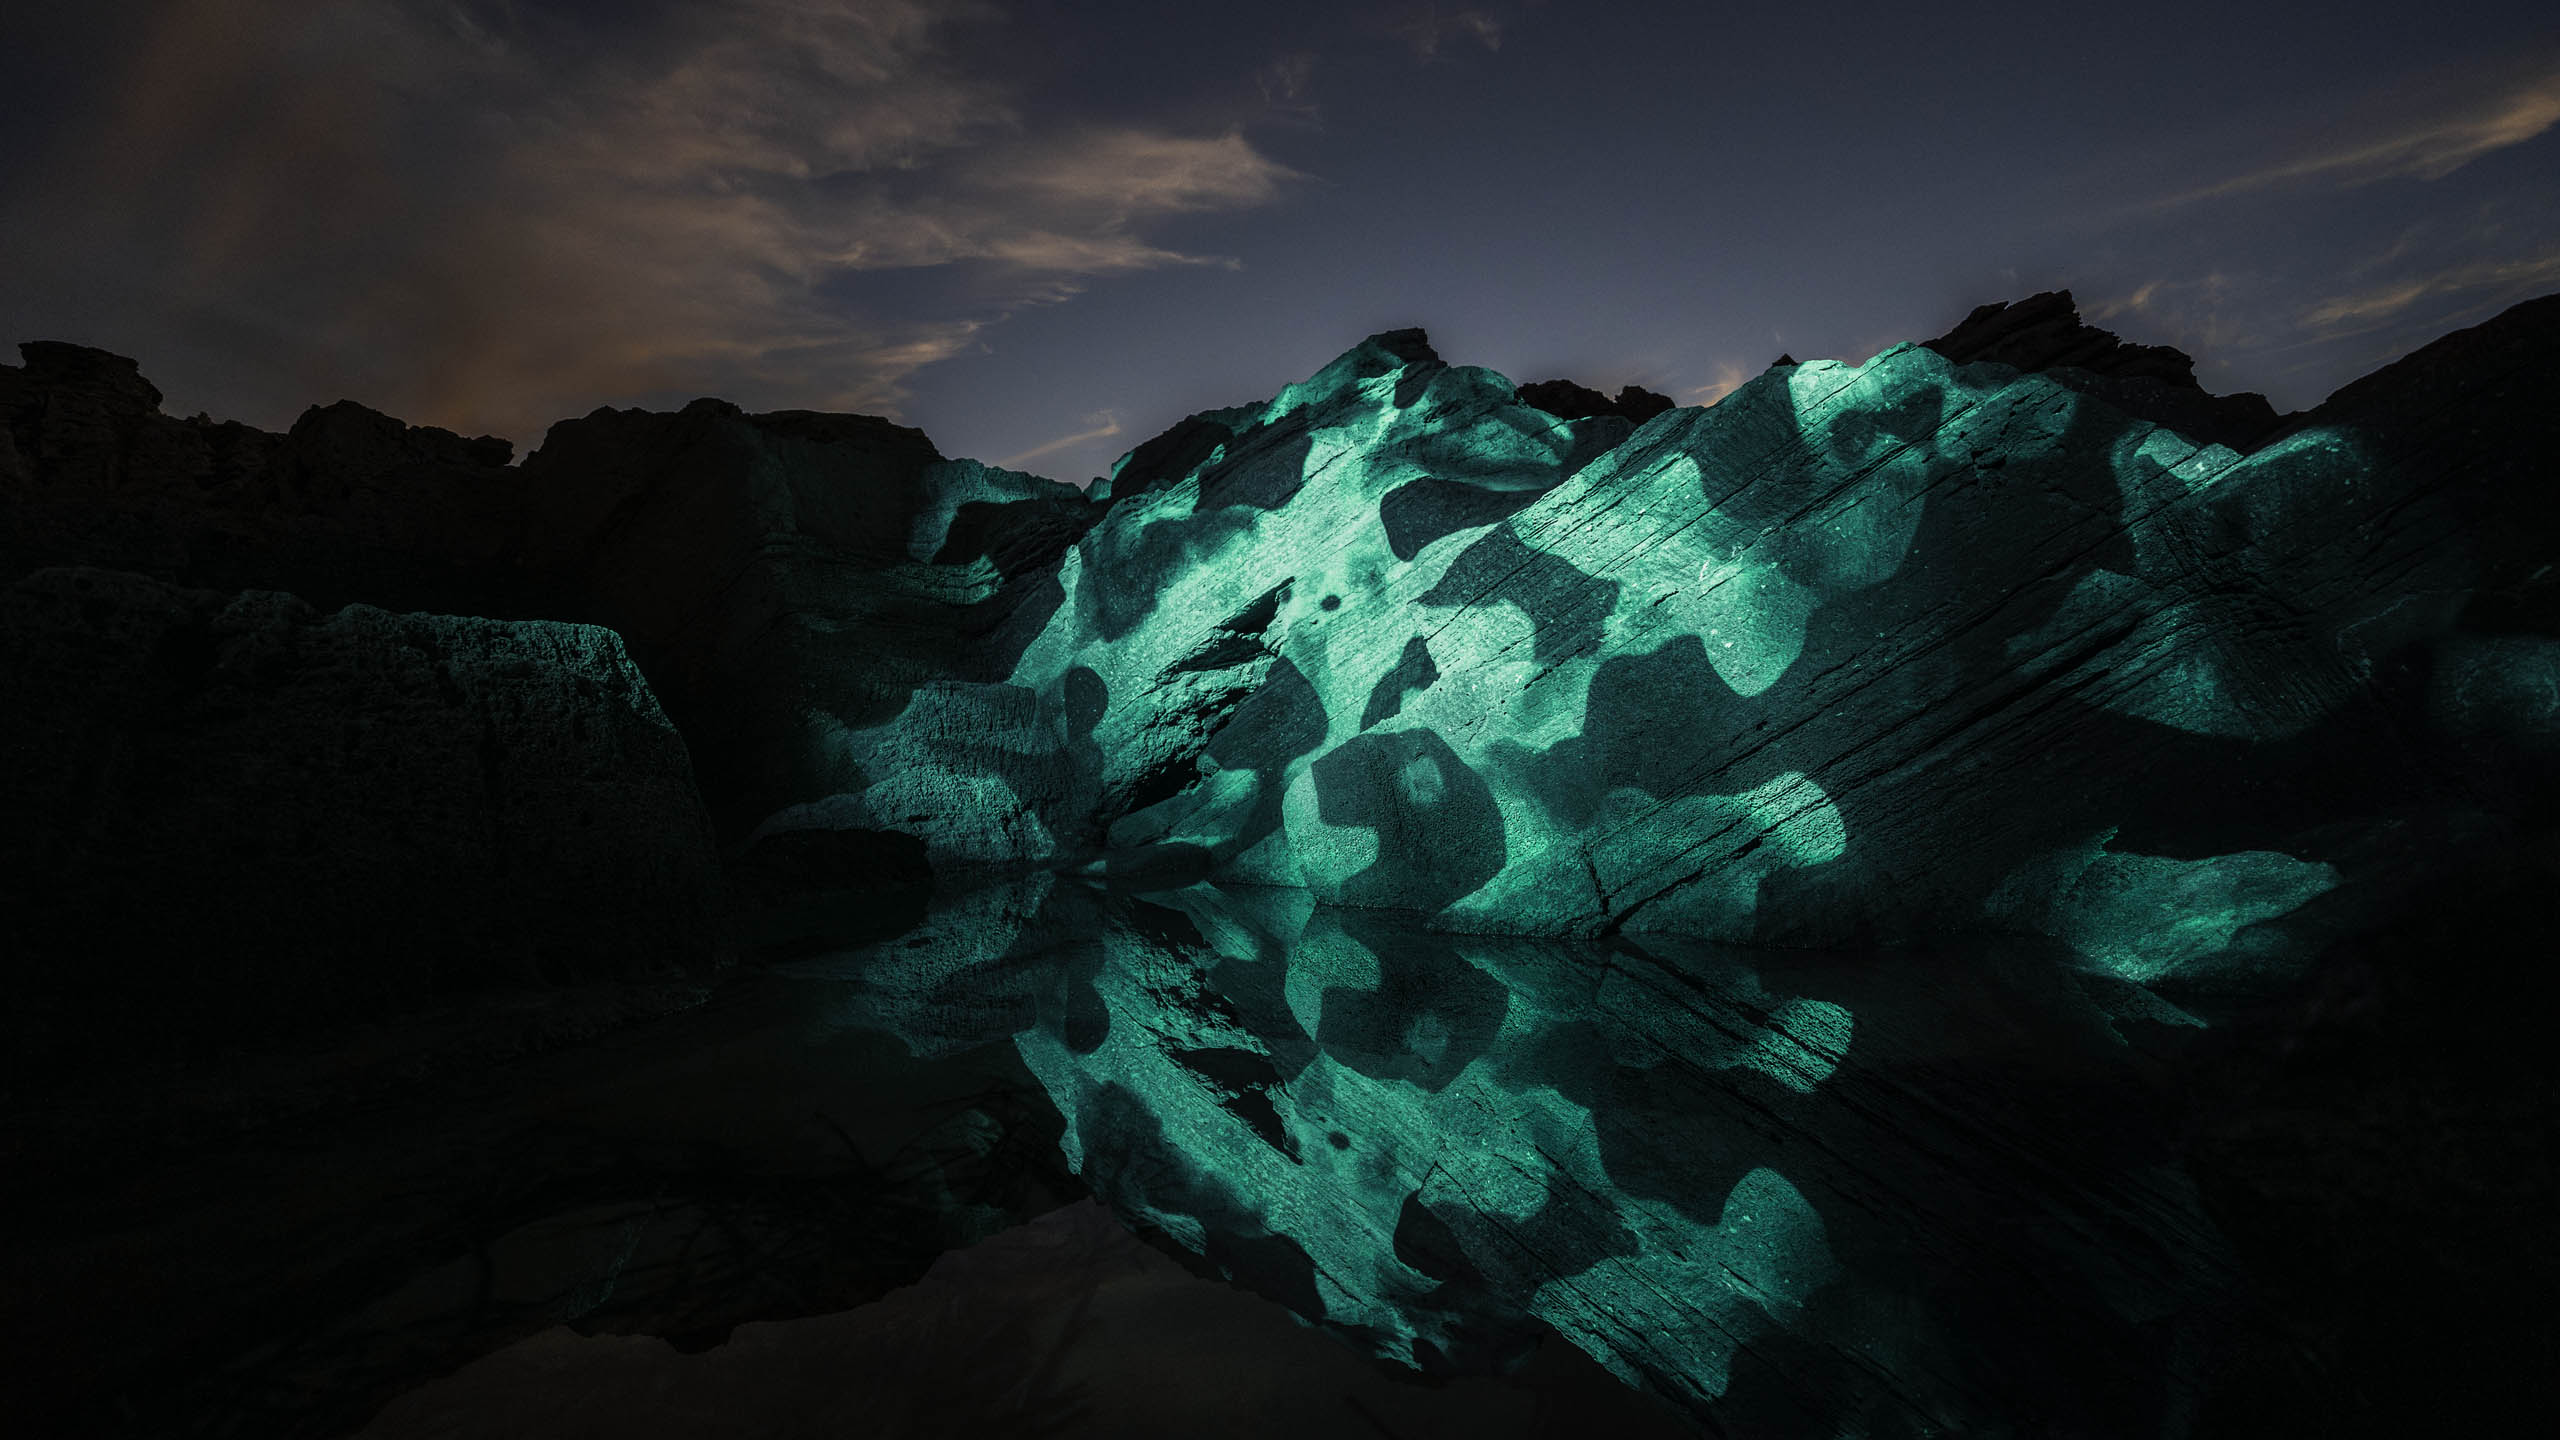 Land Art installation on a Rock structure with water reflections at the coast of Formentera, Spain